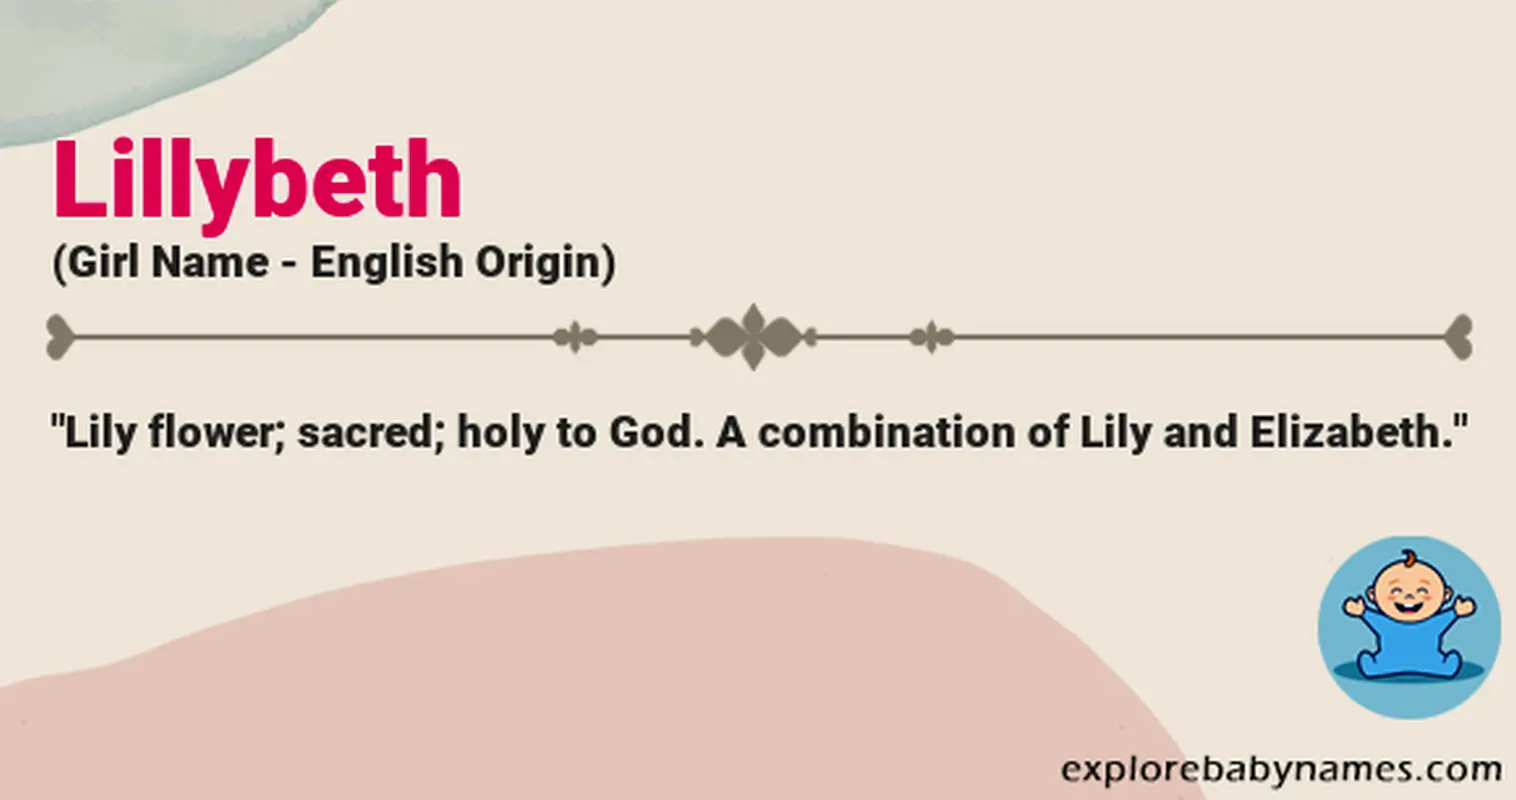 Meaning of Lillybeth